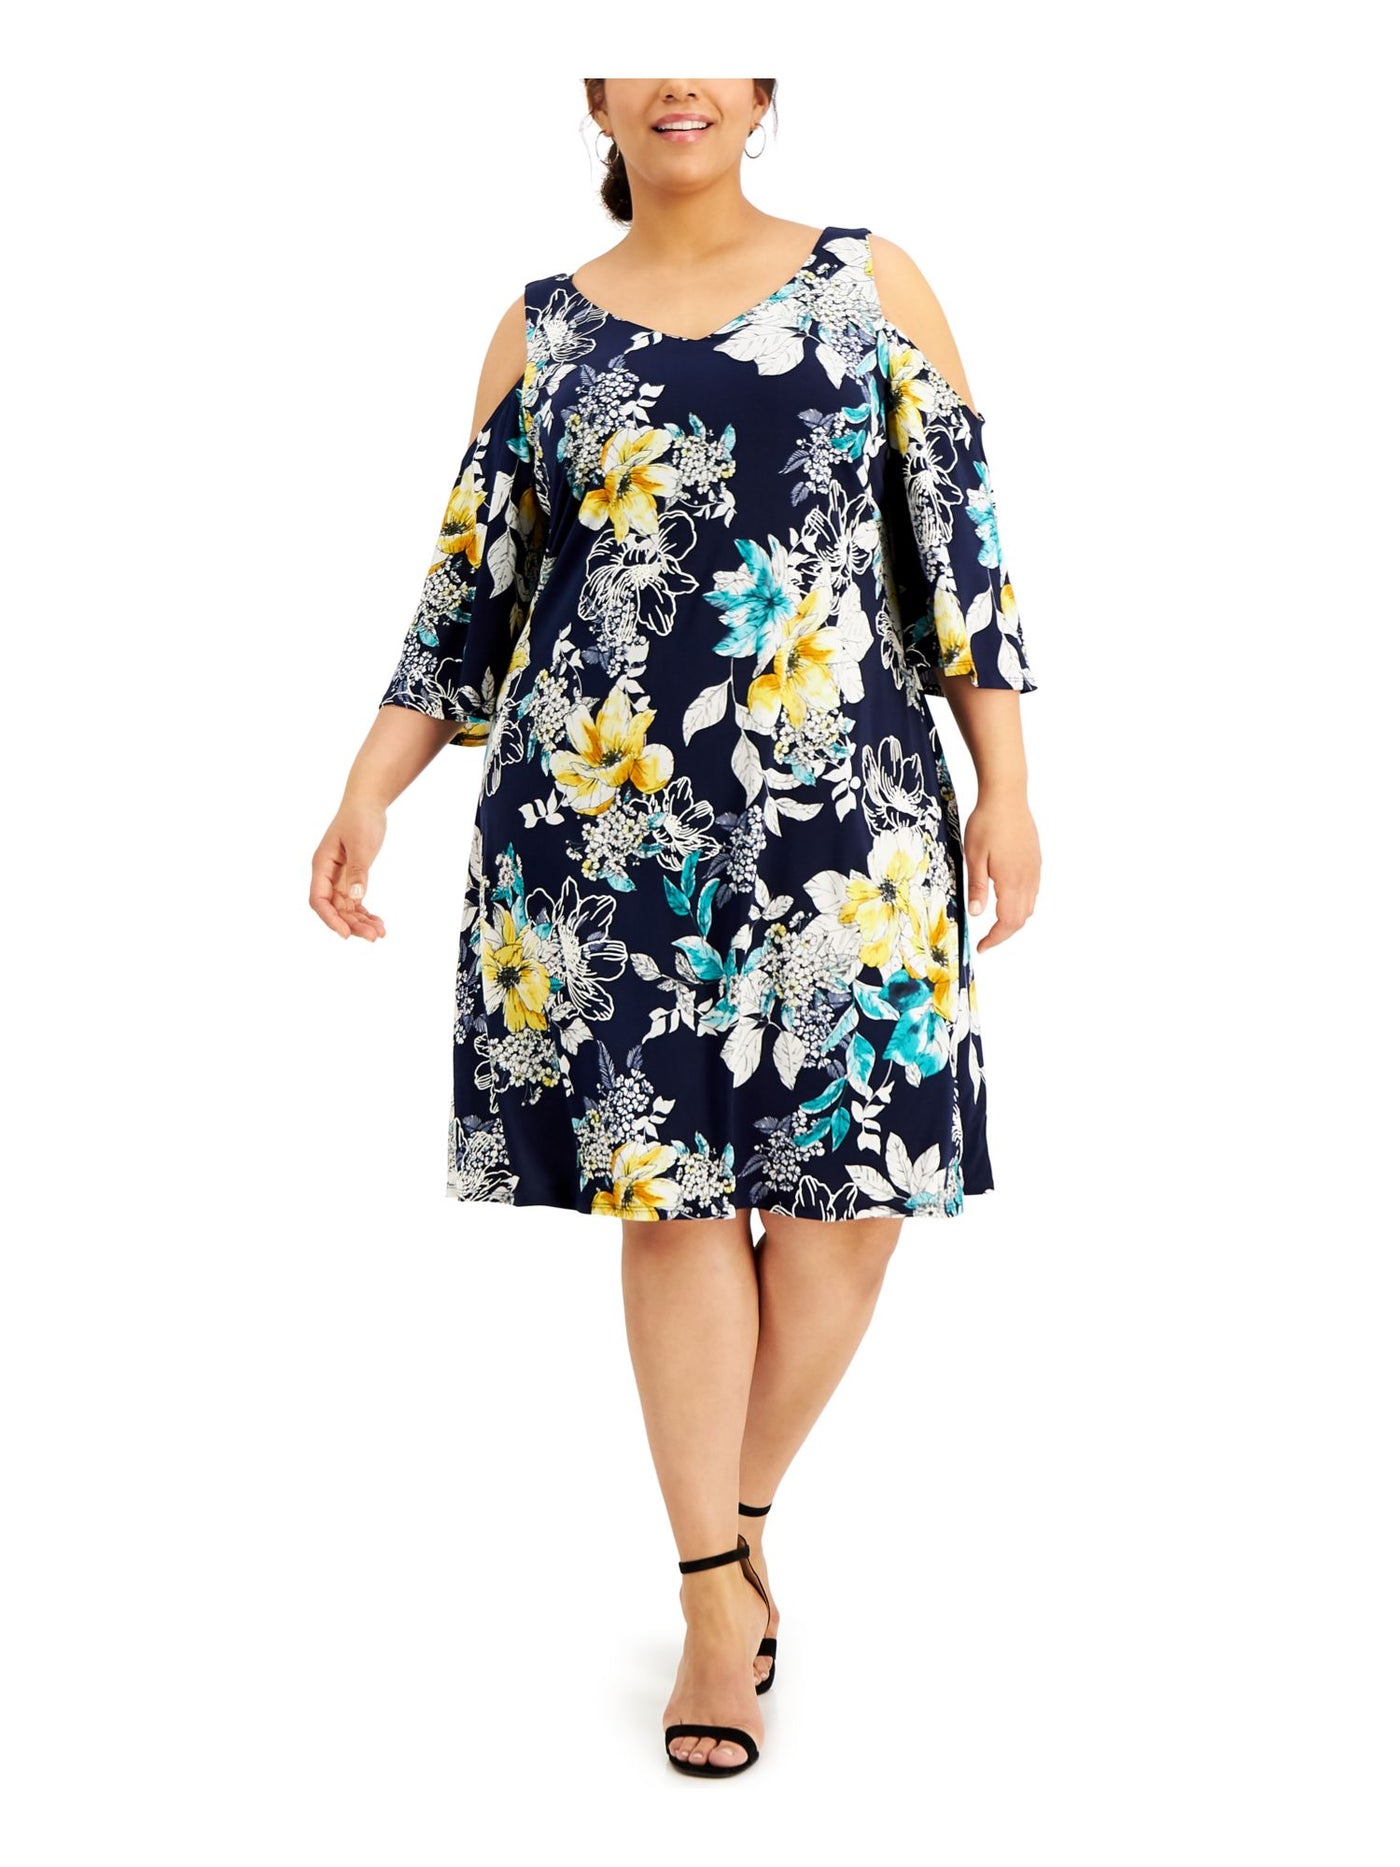 CONNECTED APPAREL Womens Navy Stretch Floral 3/4 Sleeve V Neck Short Wear To Work Shift Dress Plus 16W